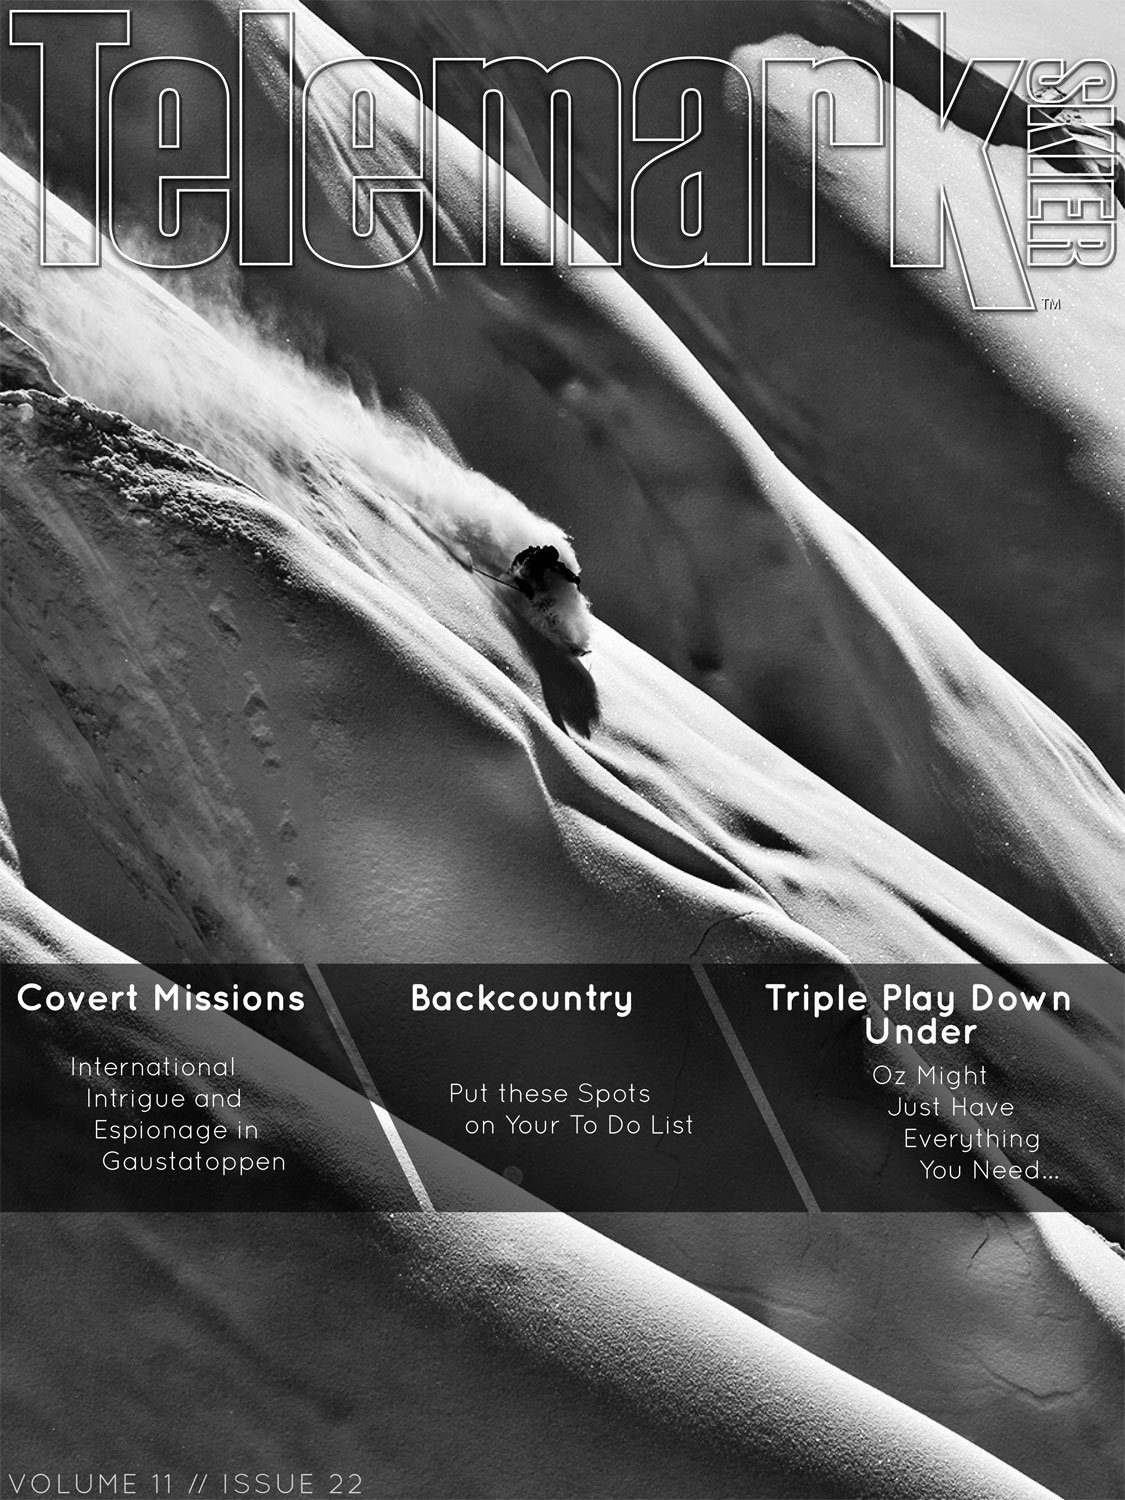 Telemark Skier - January Issue Cover